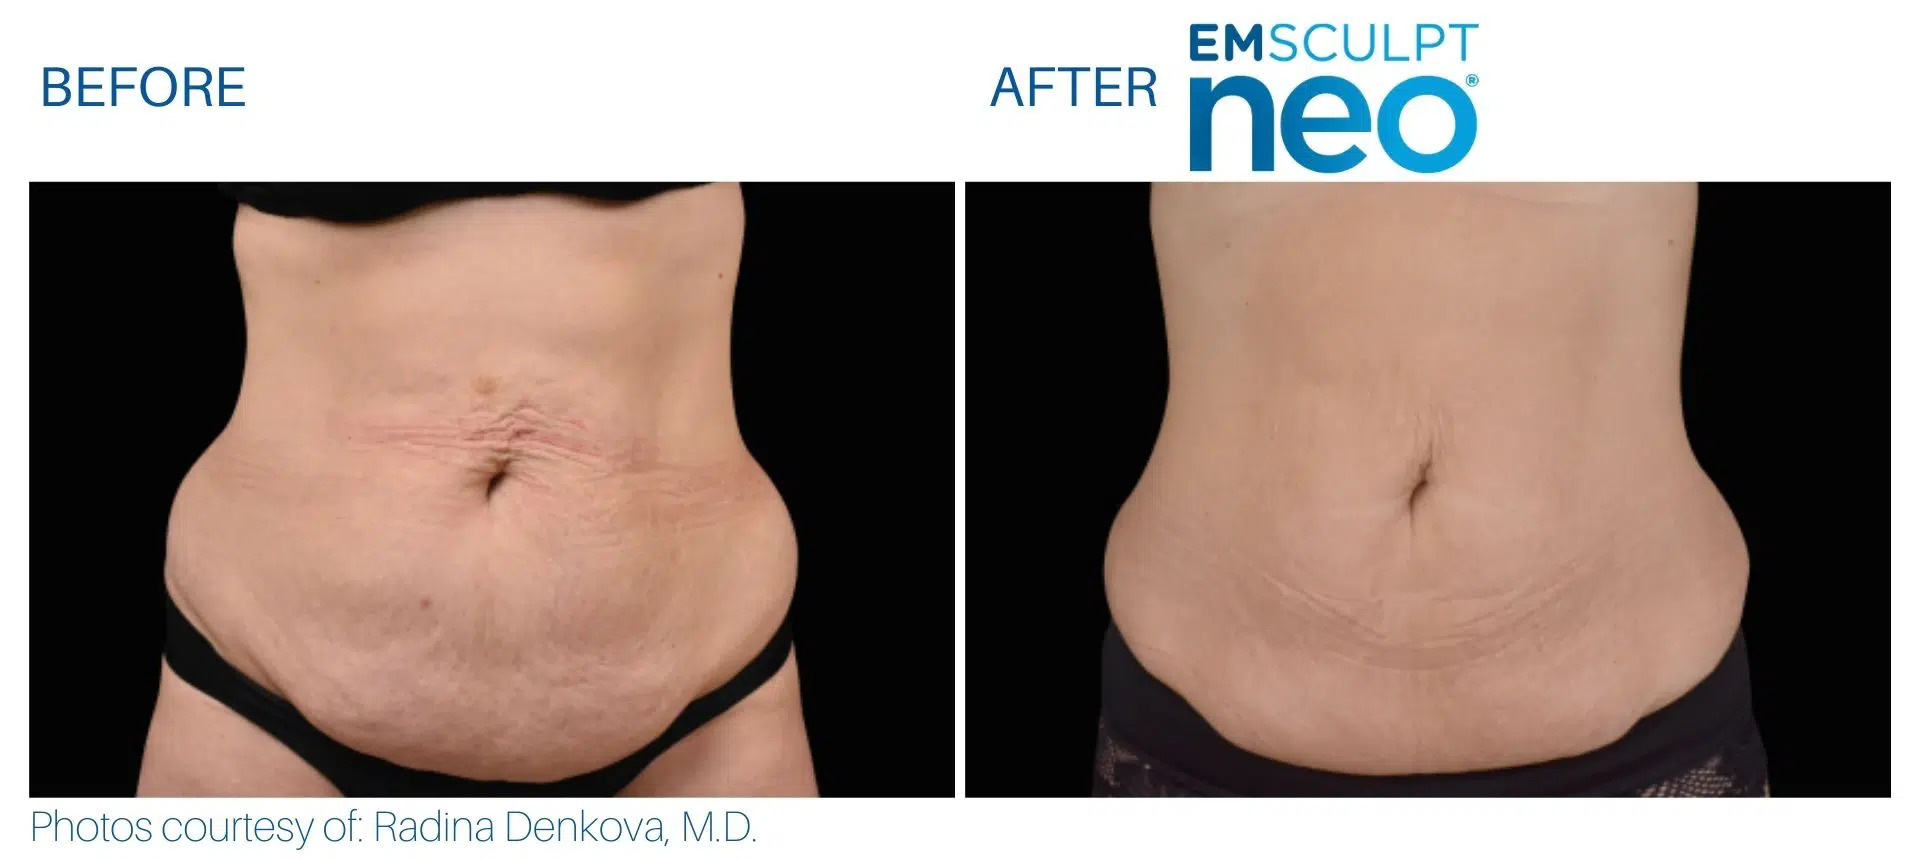 Emsculpt NEO Before and After